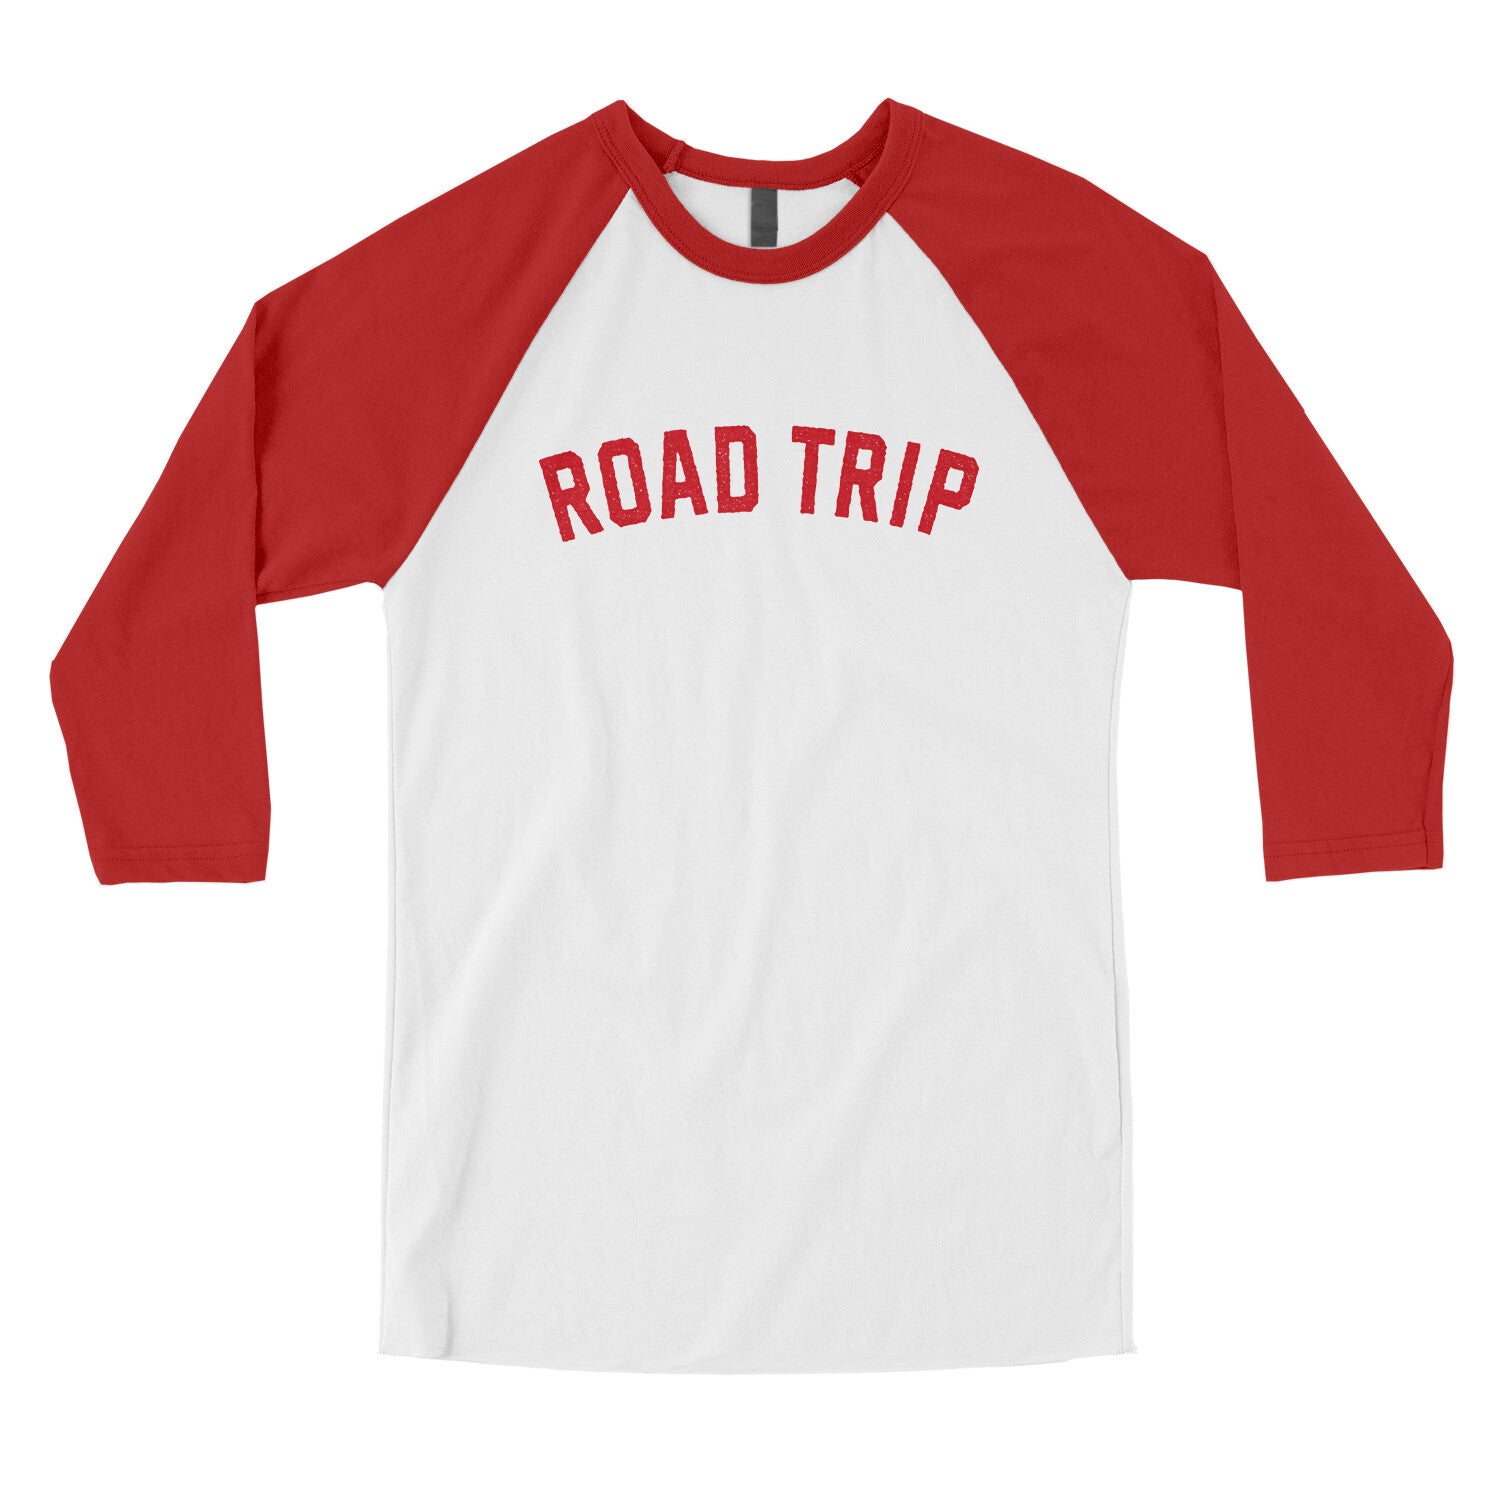 Road Trip in White with Red Color